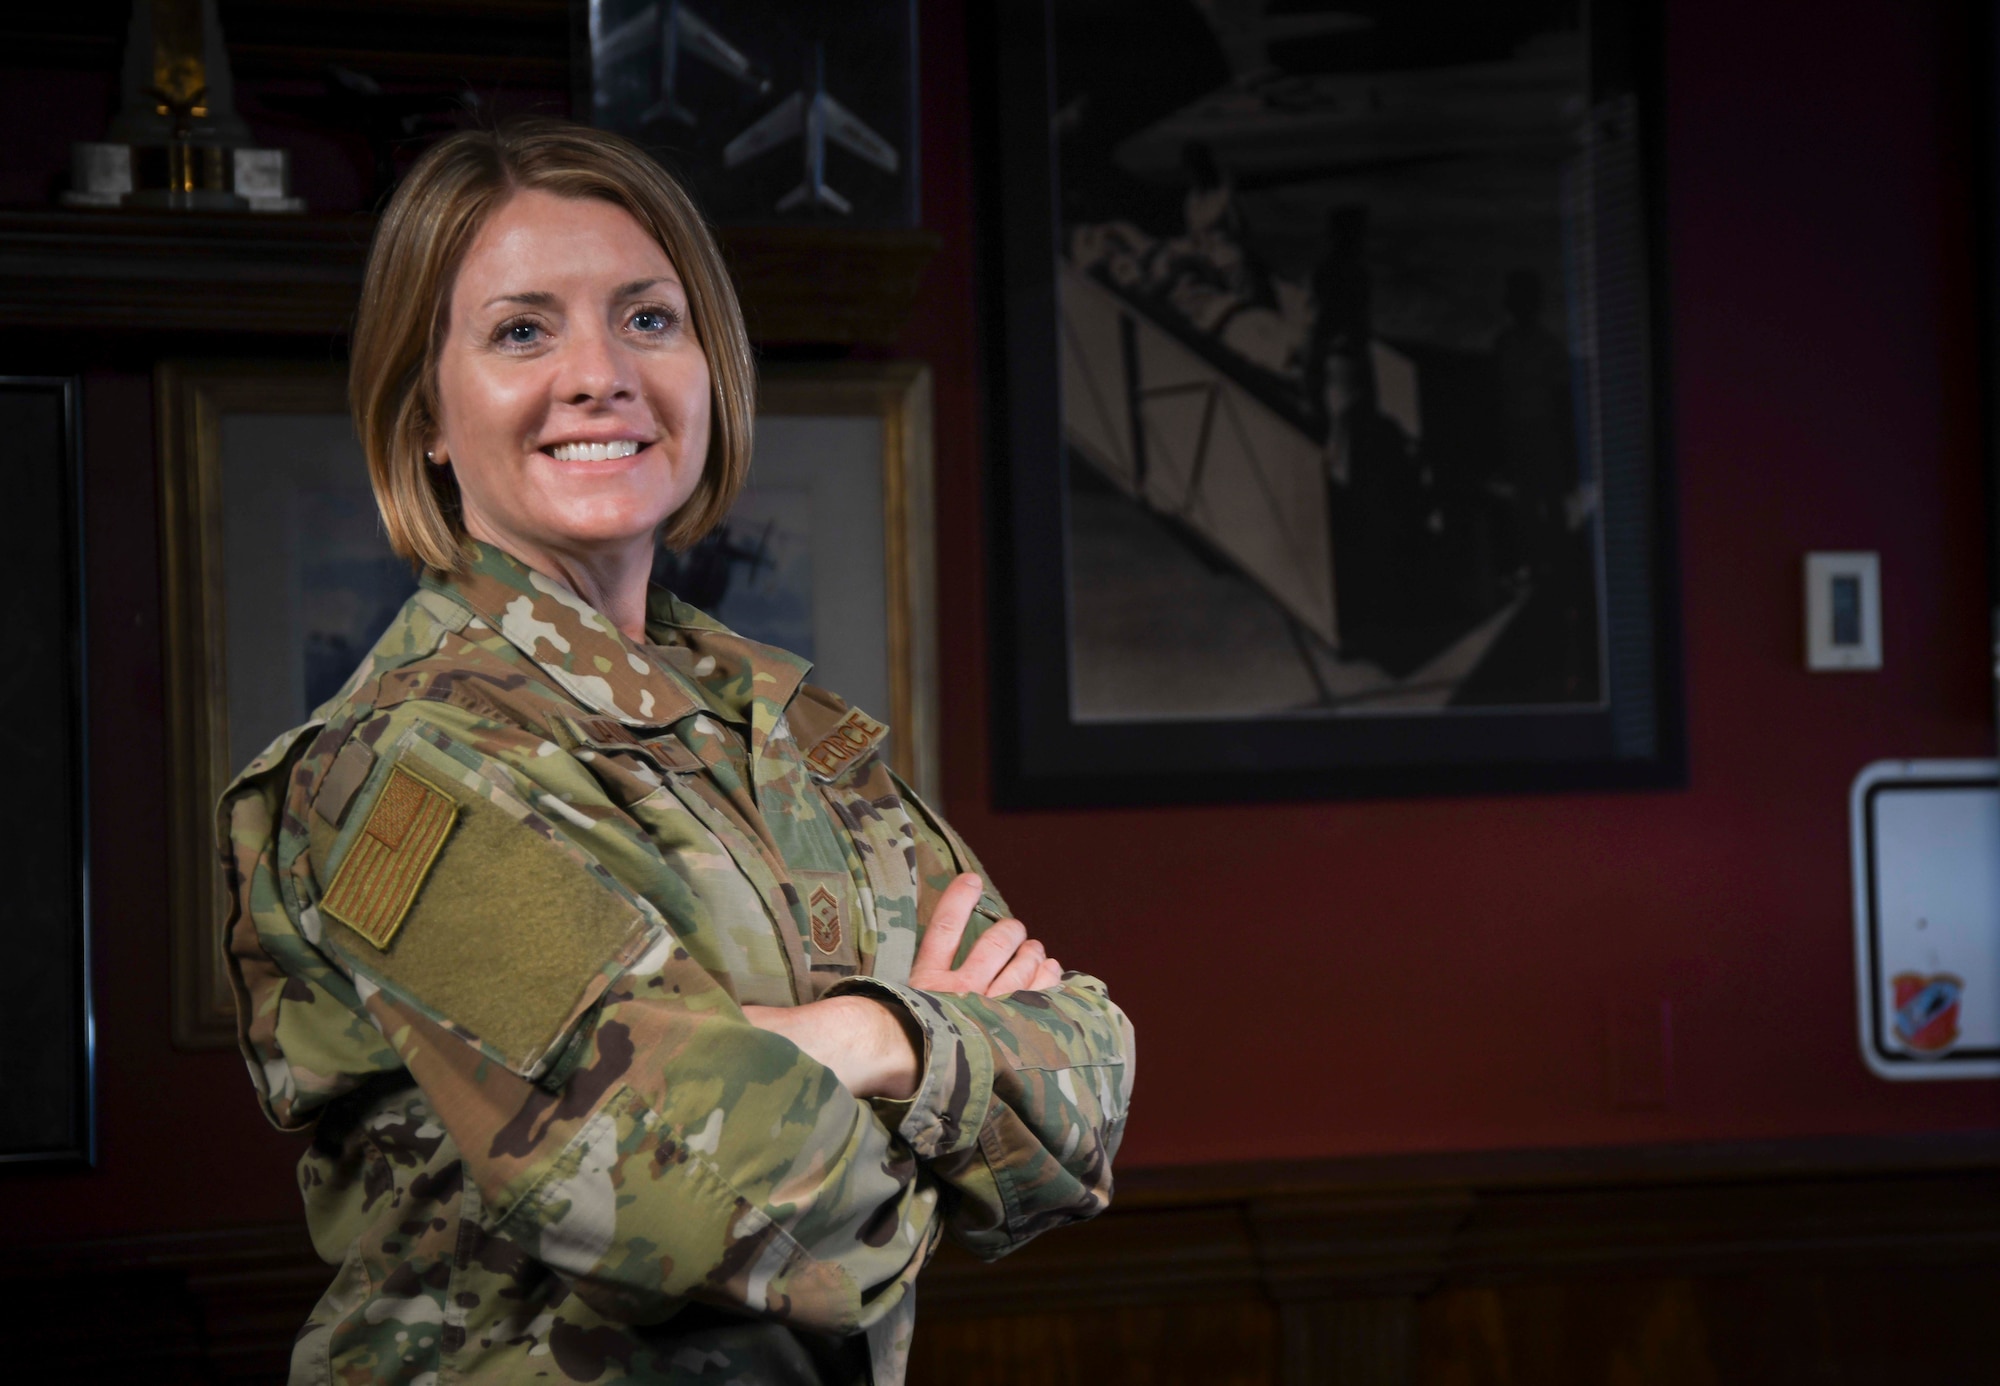 U.S. Air Force 1st Sgt. Rachel L. Landegent, the wing staff and operations group first sergeant with the 161st Air Refueling Wing, Arizona Air National Guard, poses for her Air National Guard 2019 Outstanding First Sergeant of the Year portrait in Phoenix, Ariz., July 2, 2019. Landegent was recognized for her overall esteemed first sergeant performance that resulted in a significant improvement in Airmen’s quality of life. (Air National Guard photo by Staff Sgt. Morgan R. Lipinski)